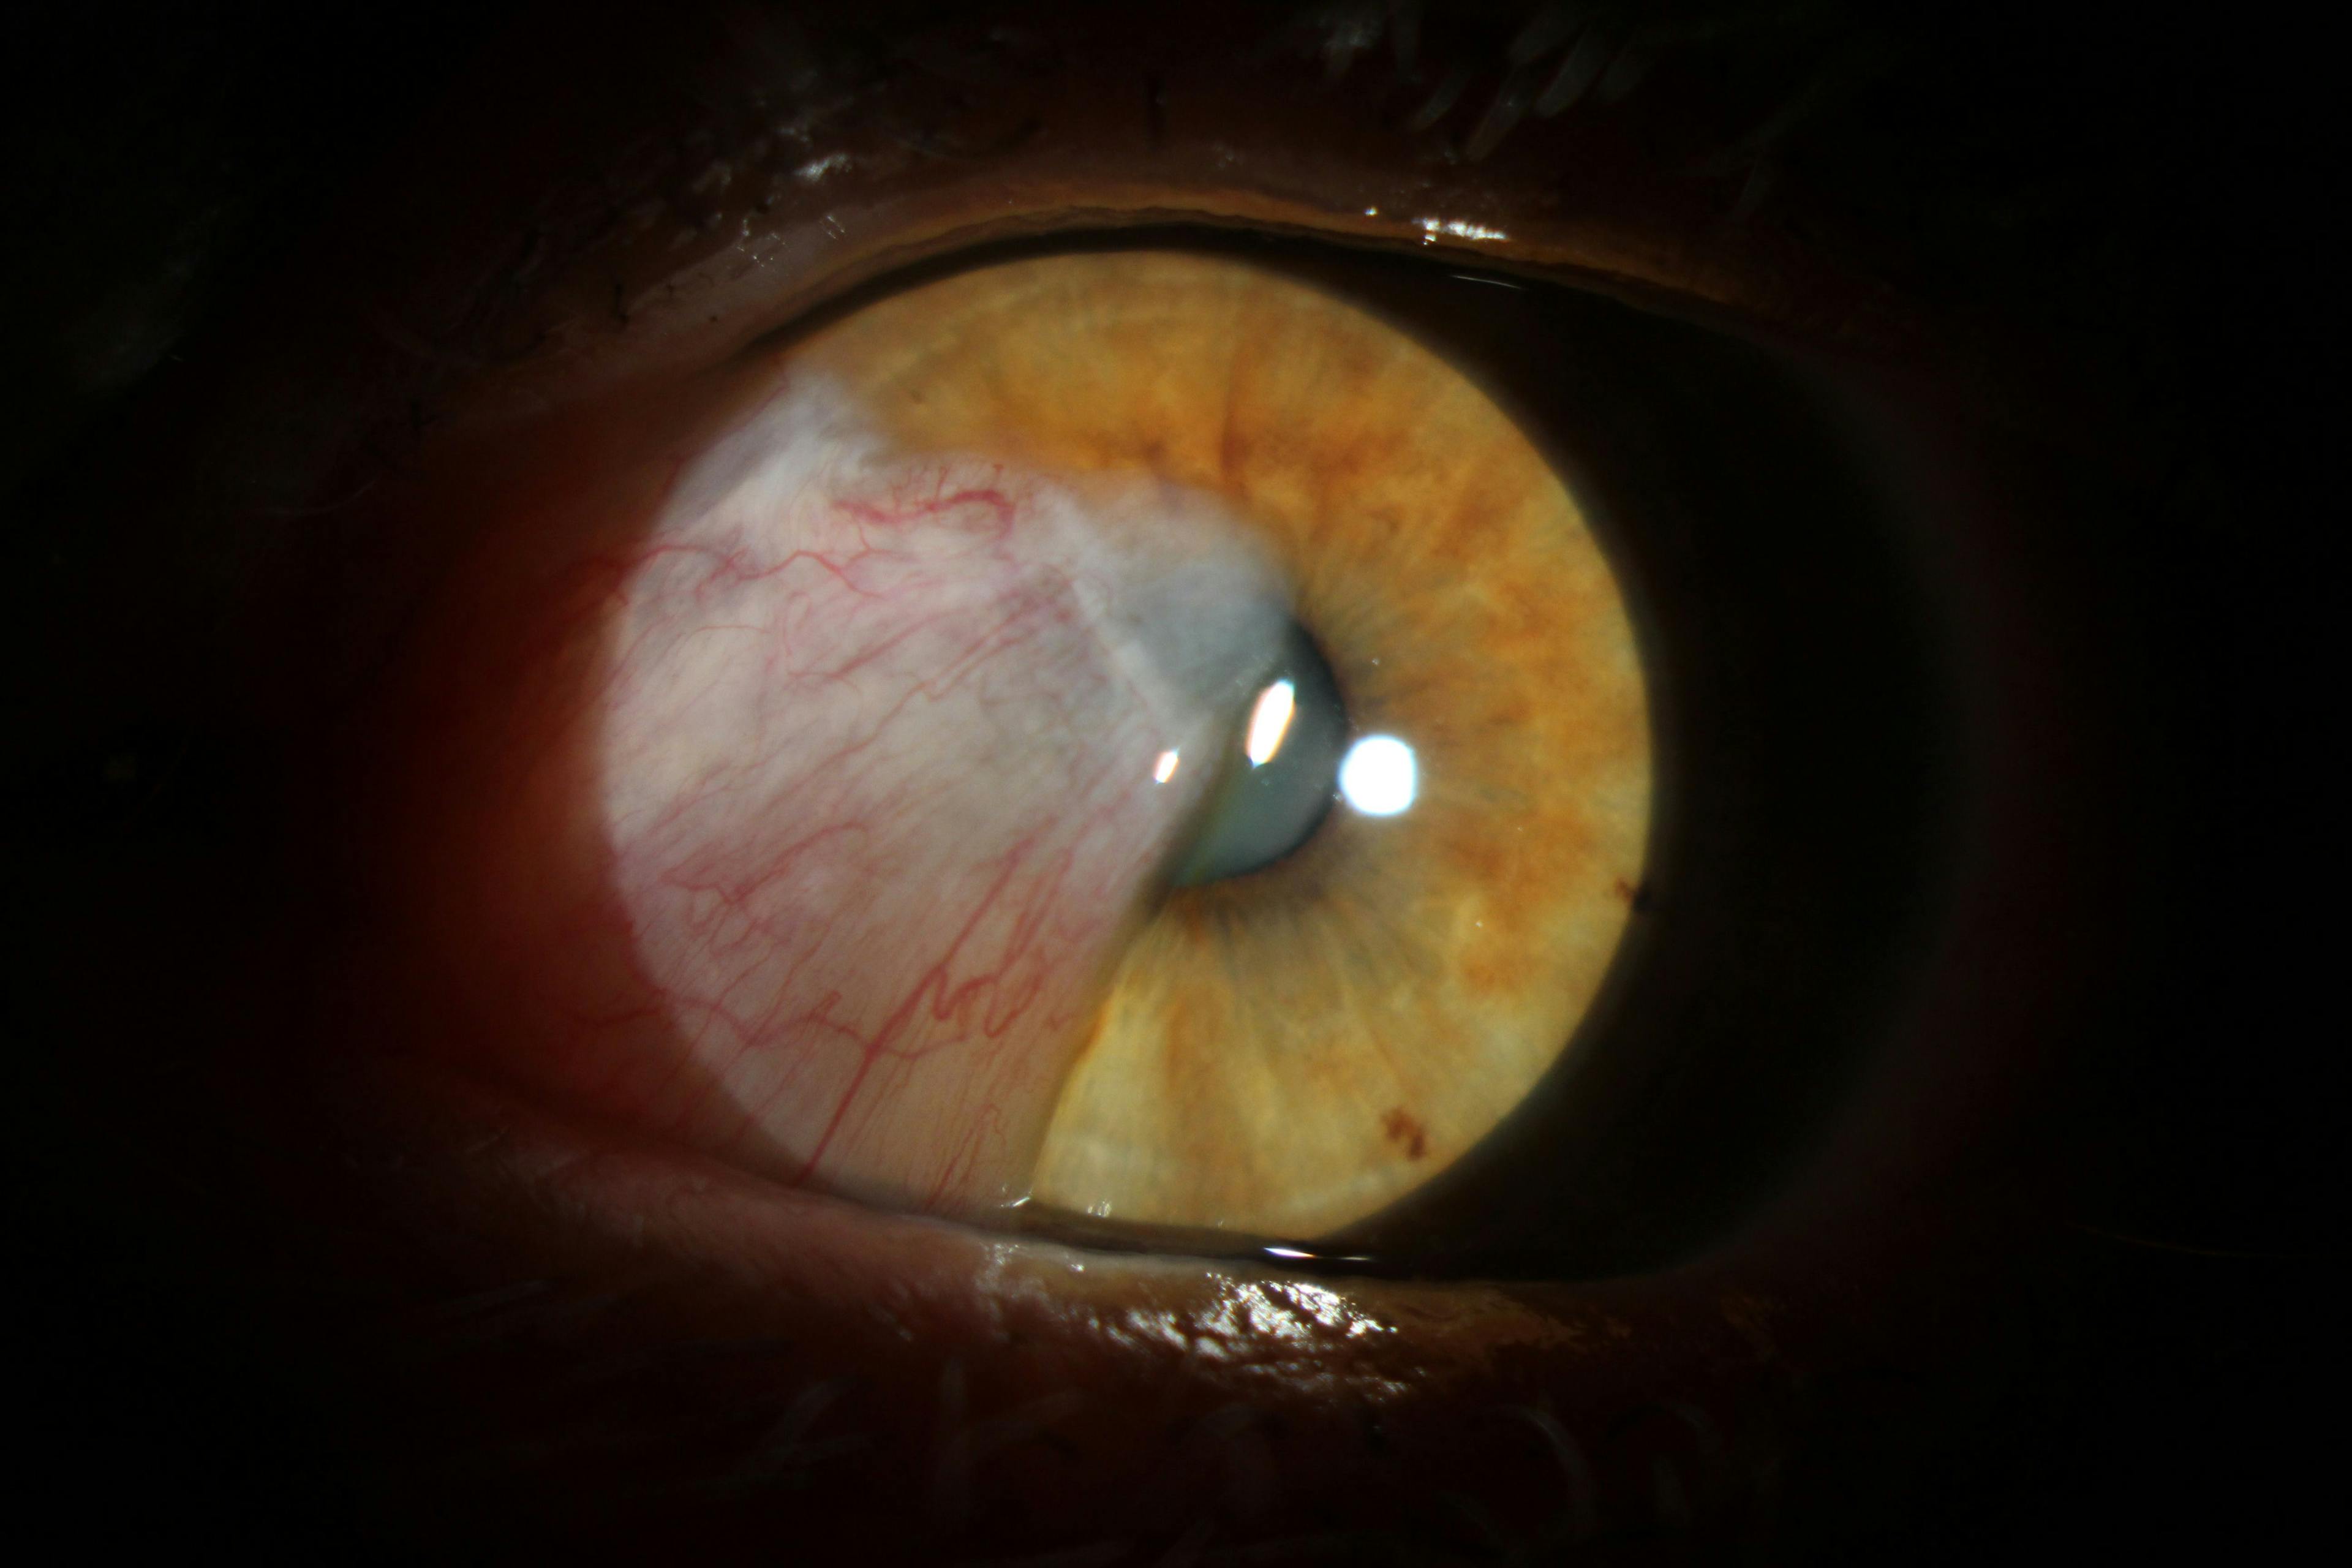 cataract and patient with DME